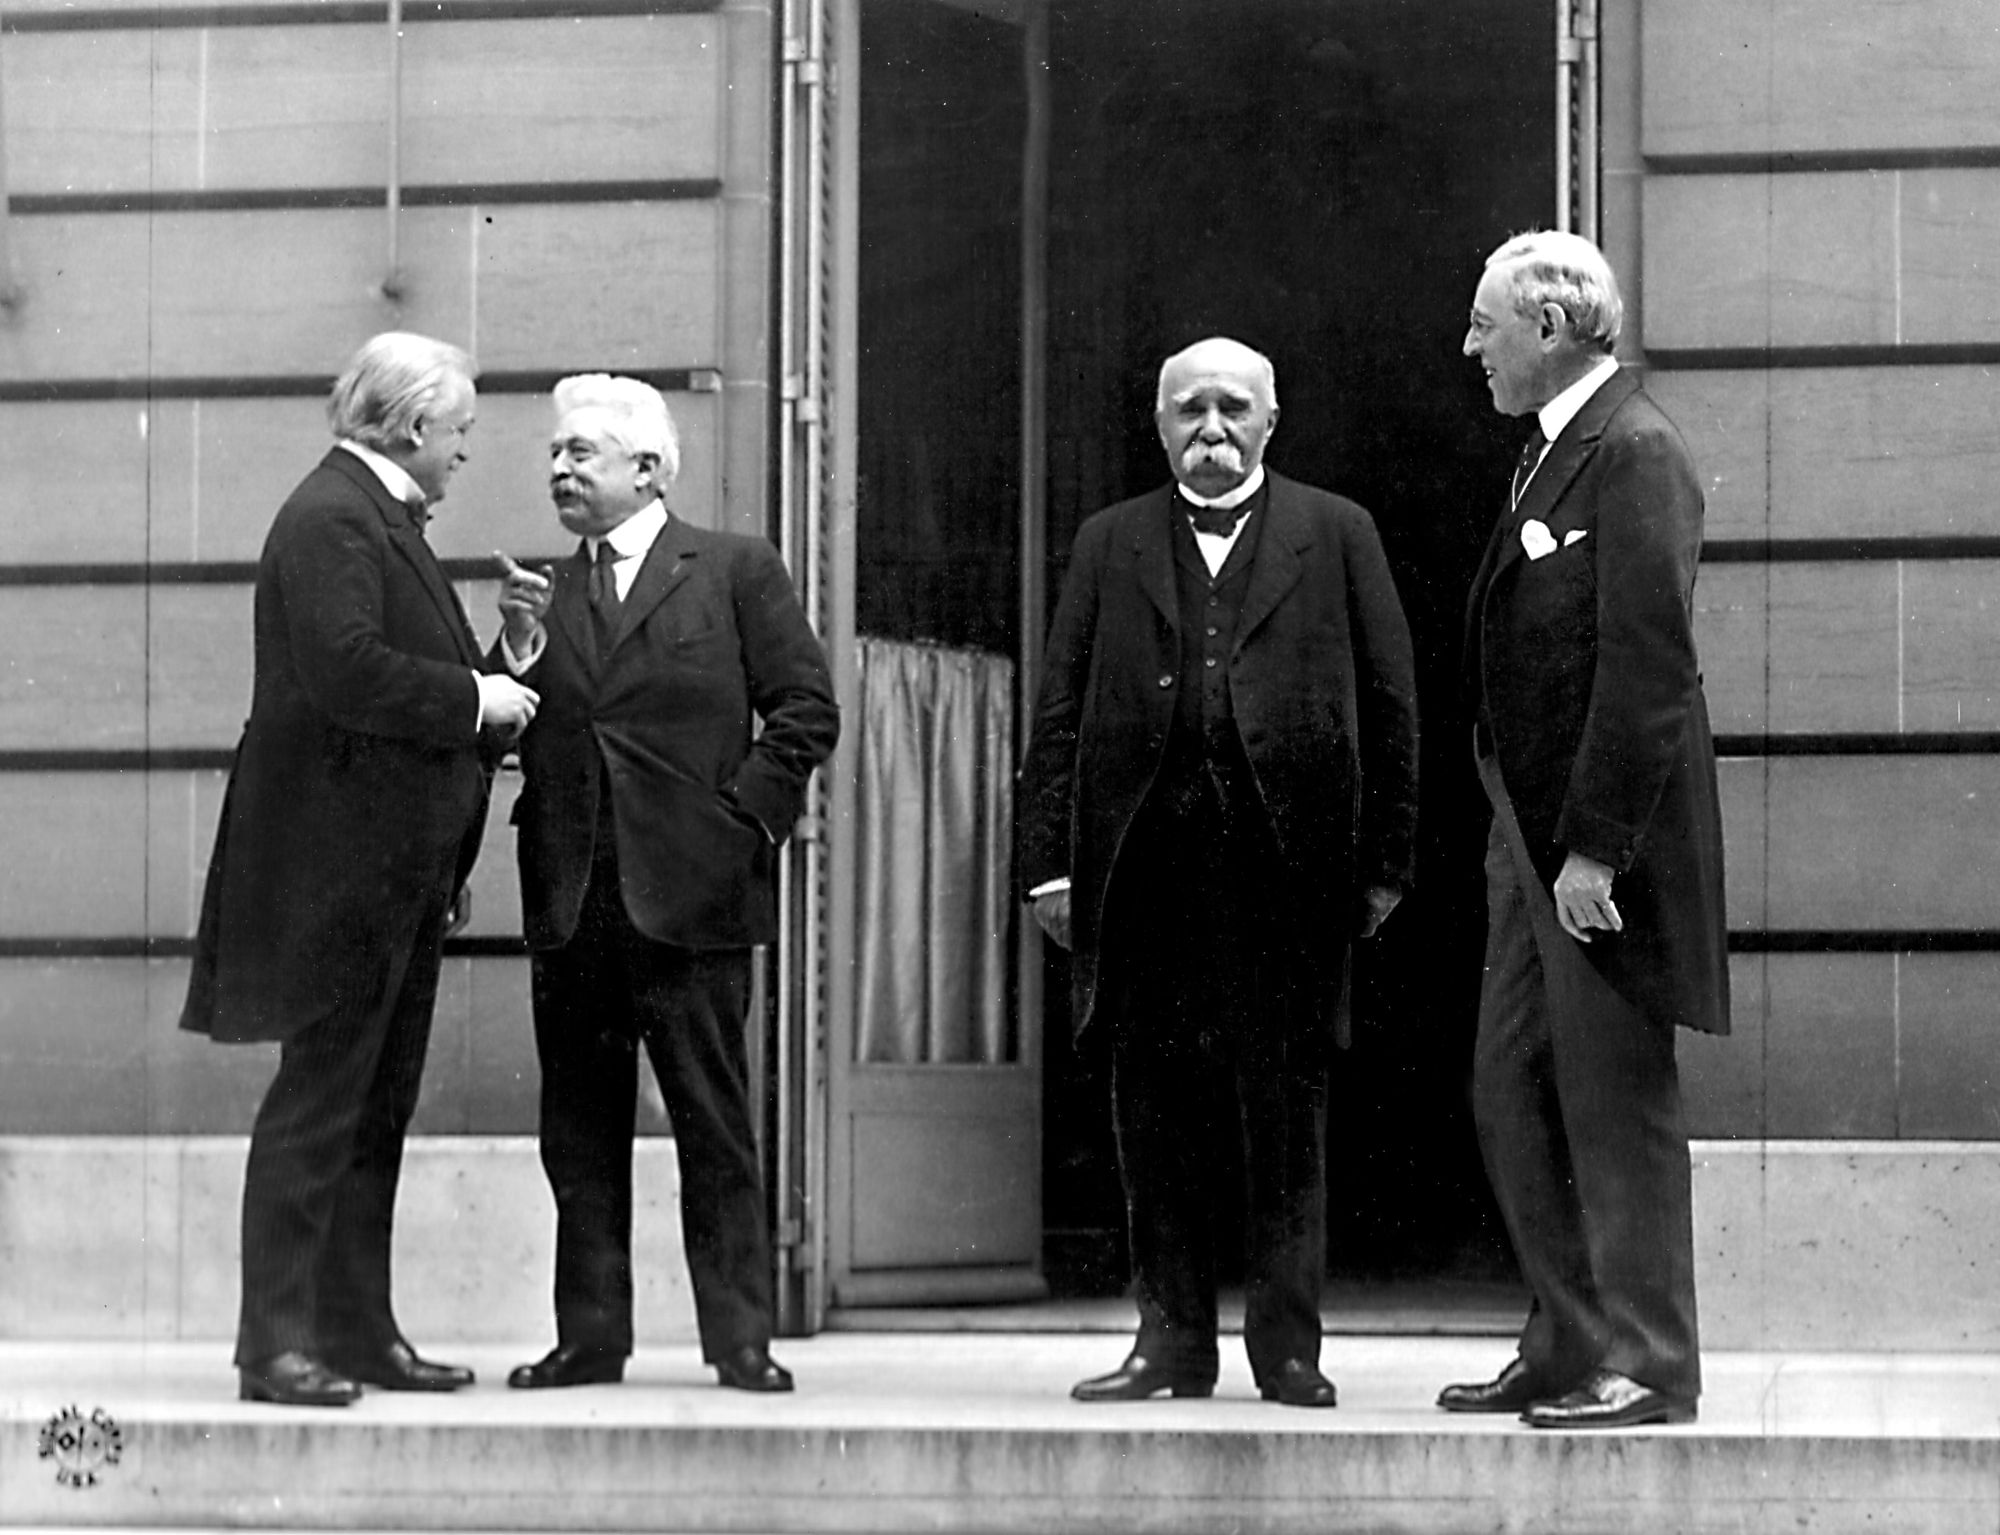 The “Big Four” according to the Library of Congress. From left to right: Prime Minister David Lloyd George of the United Kingdom, Premier Vittorio Orlando of Italy, Premier Georges Clemenceau of France, and President Woodrow Wilson of the United States. Source: Library of Congress.